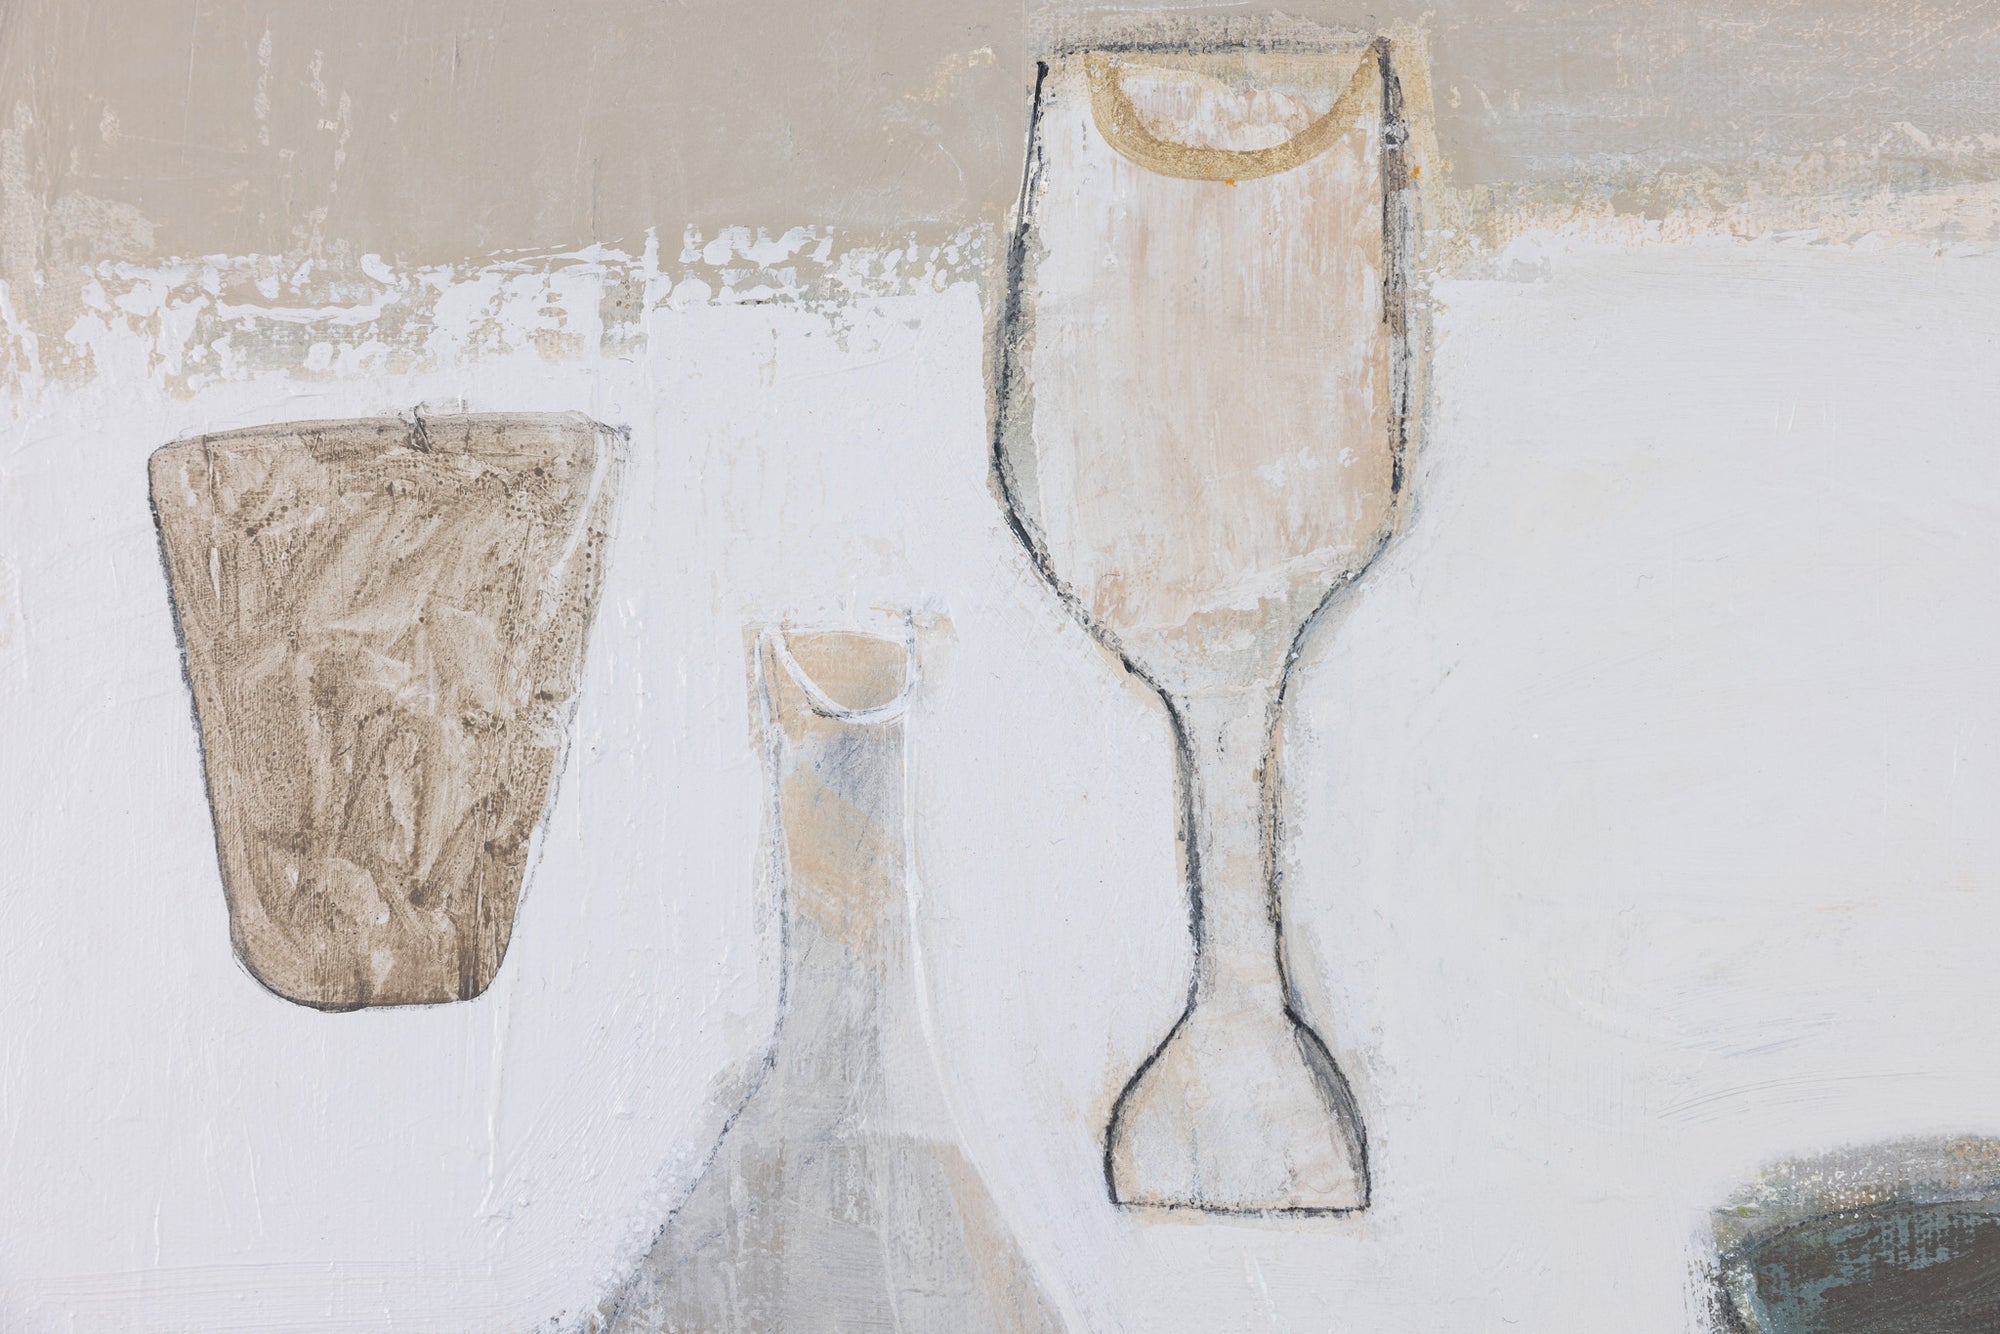 With Friends, Mixed media on linen by Sonia Barton, available from Padstow Gallery, Cornwall